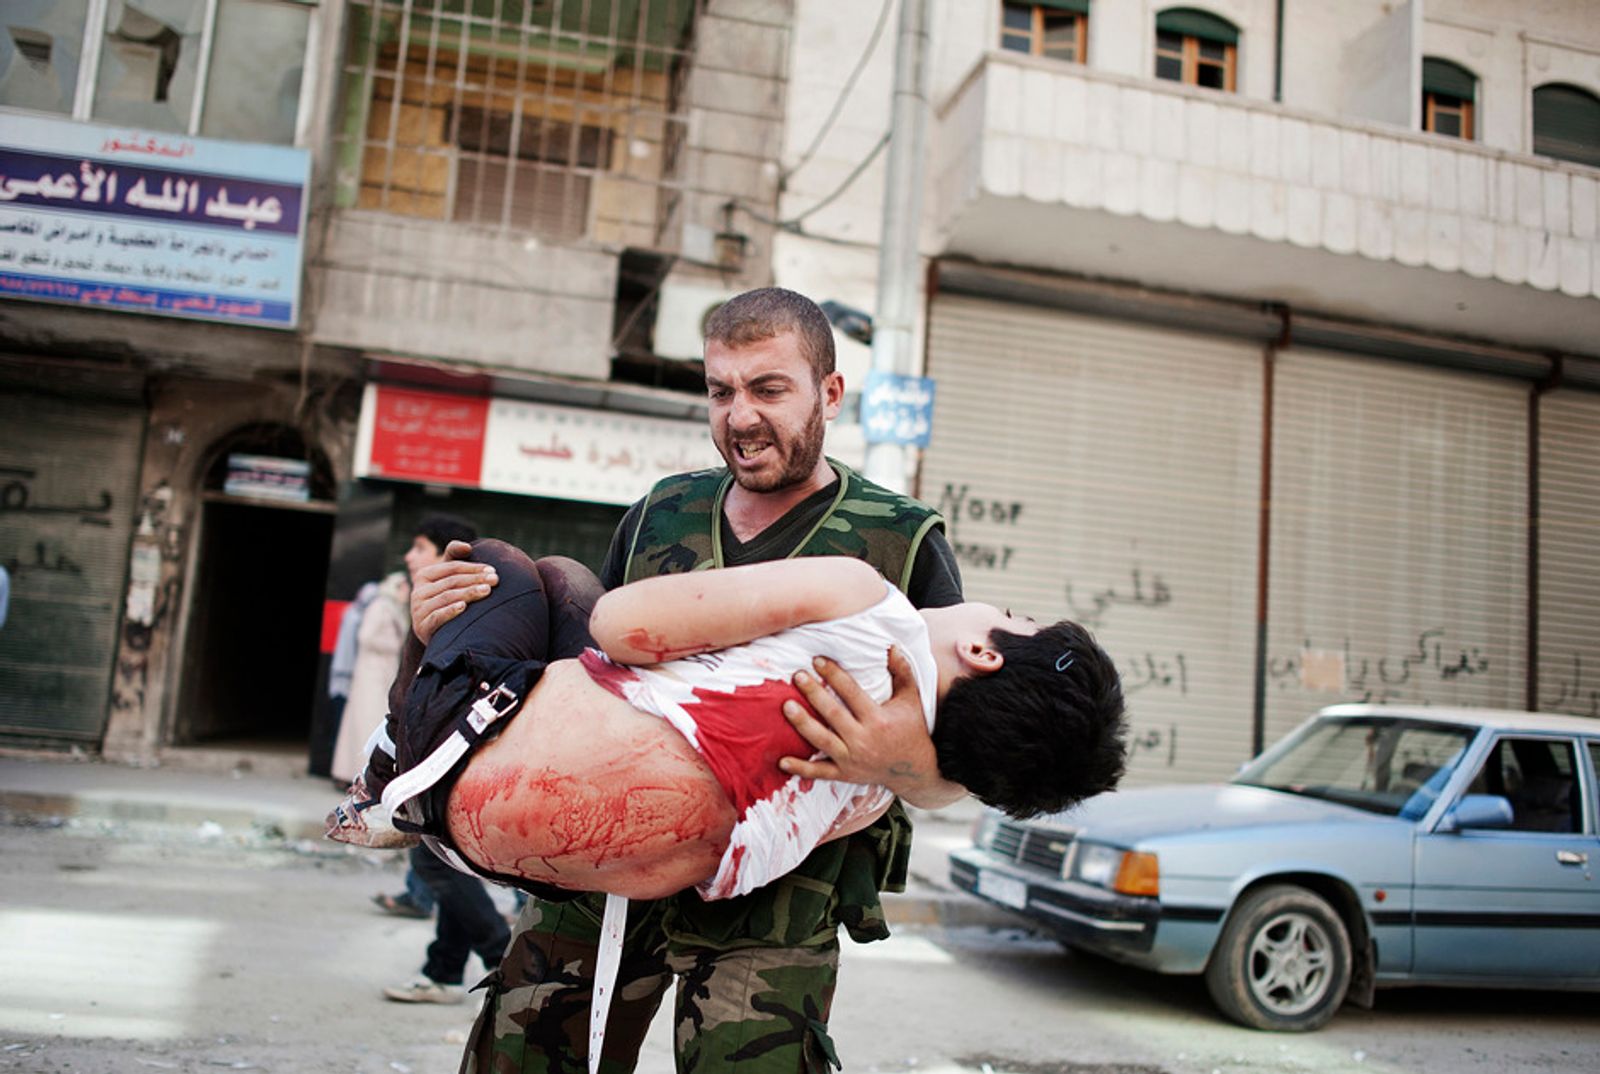 © Giulio Piscitelli - Syria, Aleppo - September 21, 2012 - Rebel carries the body of a child killed by bombs Ph.Giulio Piscitelli